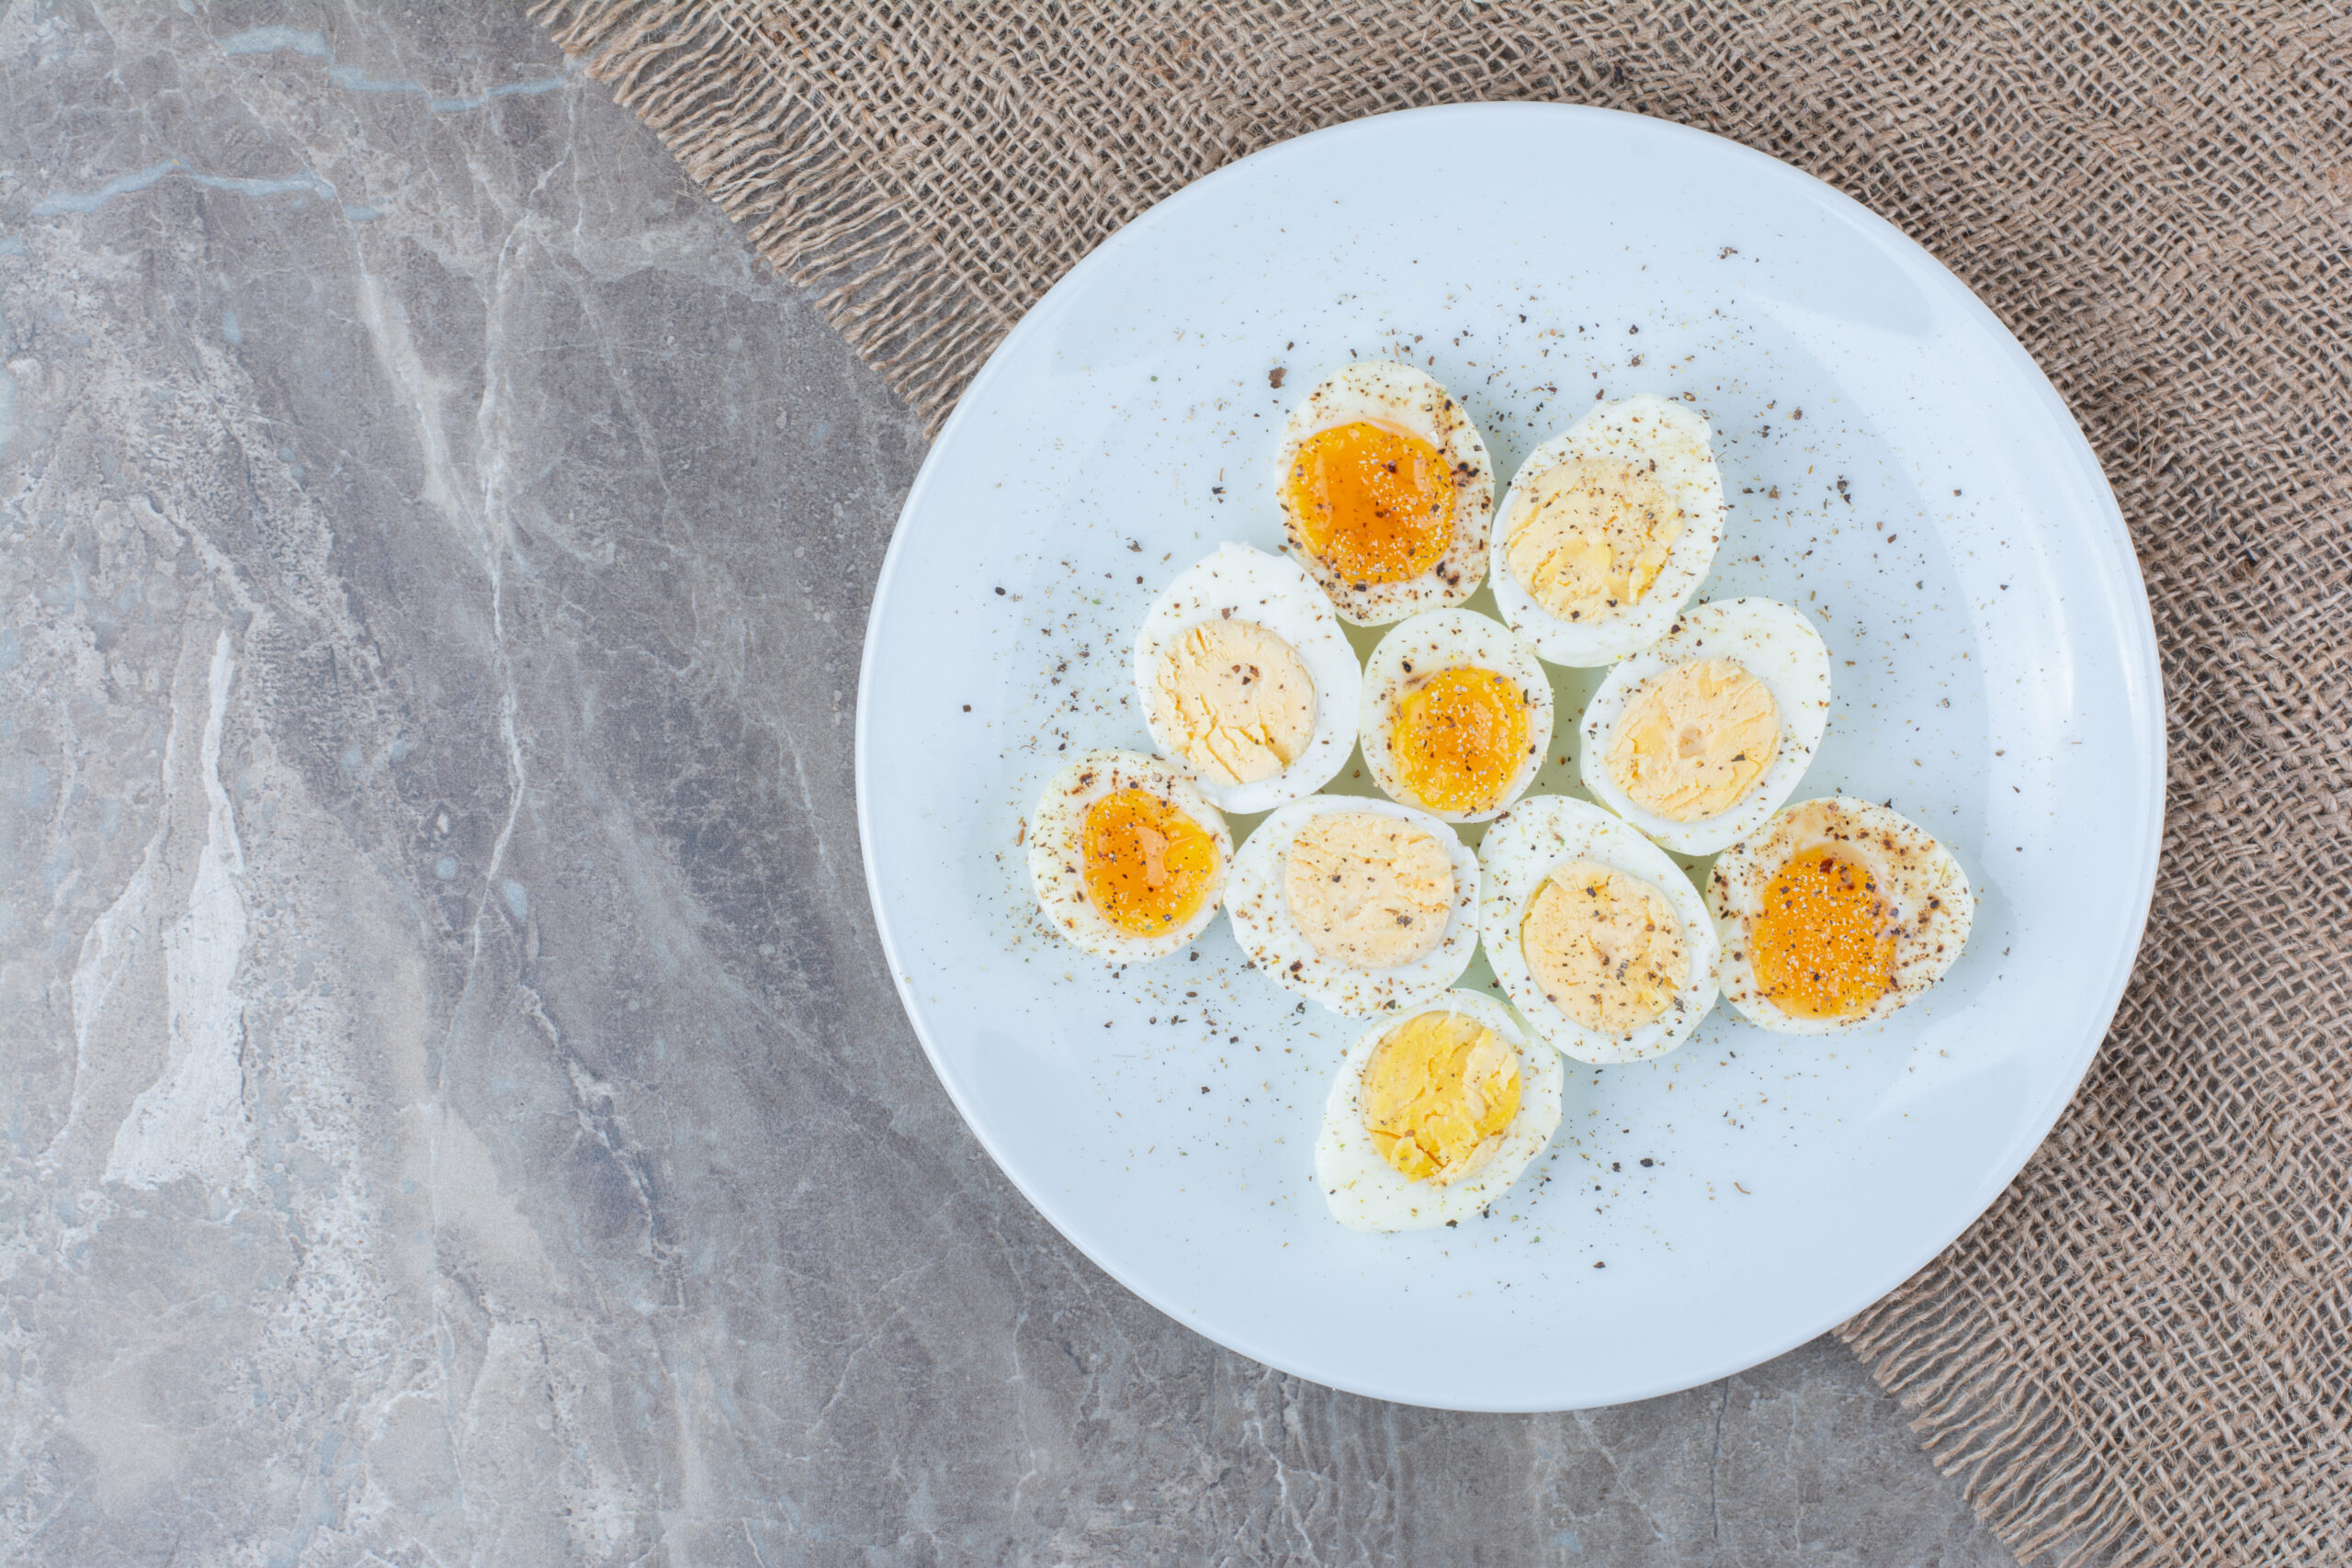 Looking for Places to Buy Salted Eggs in Singapore?